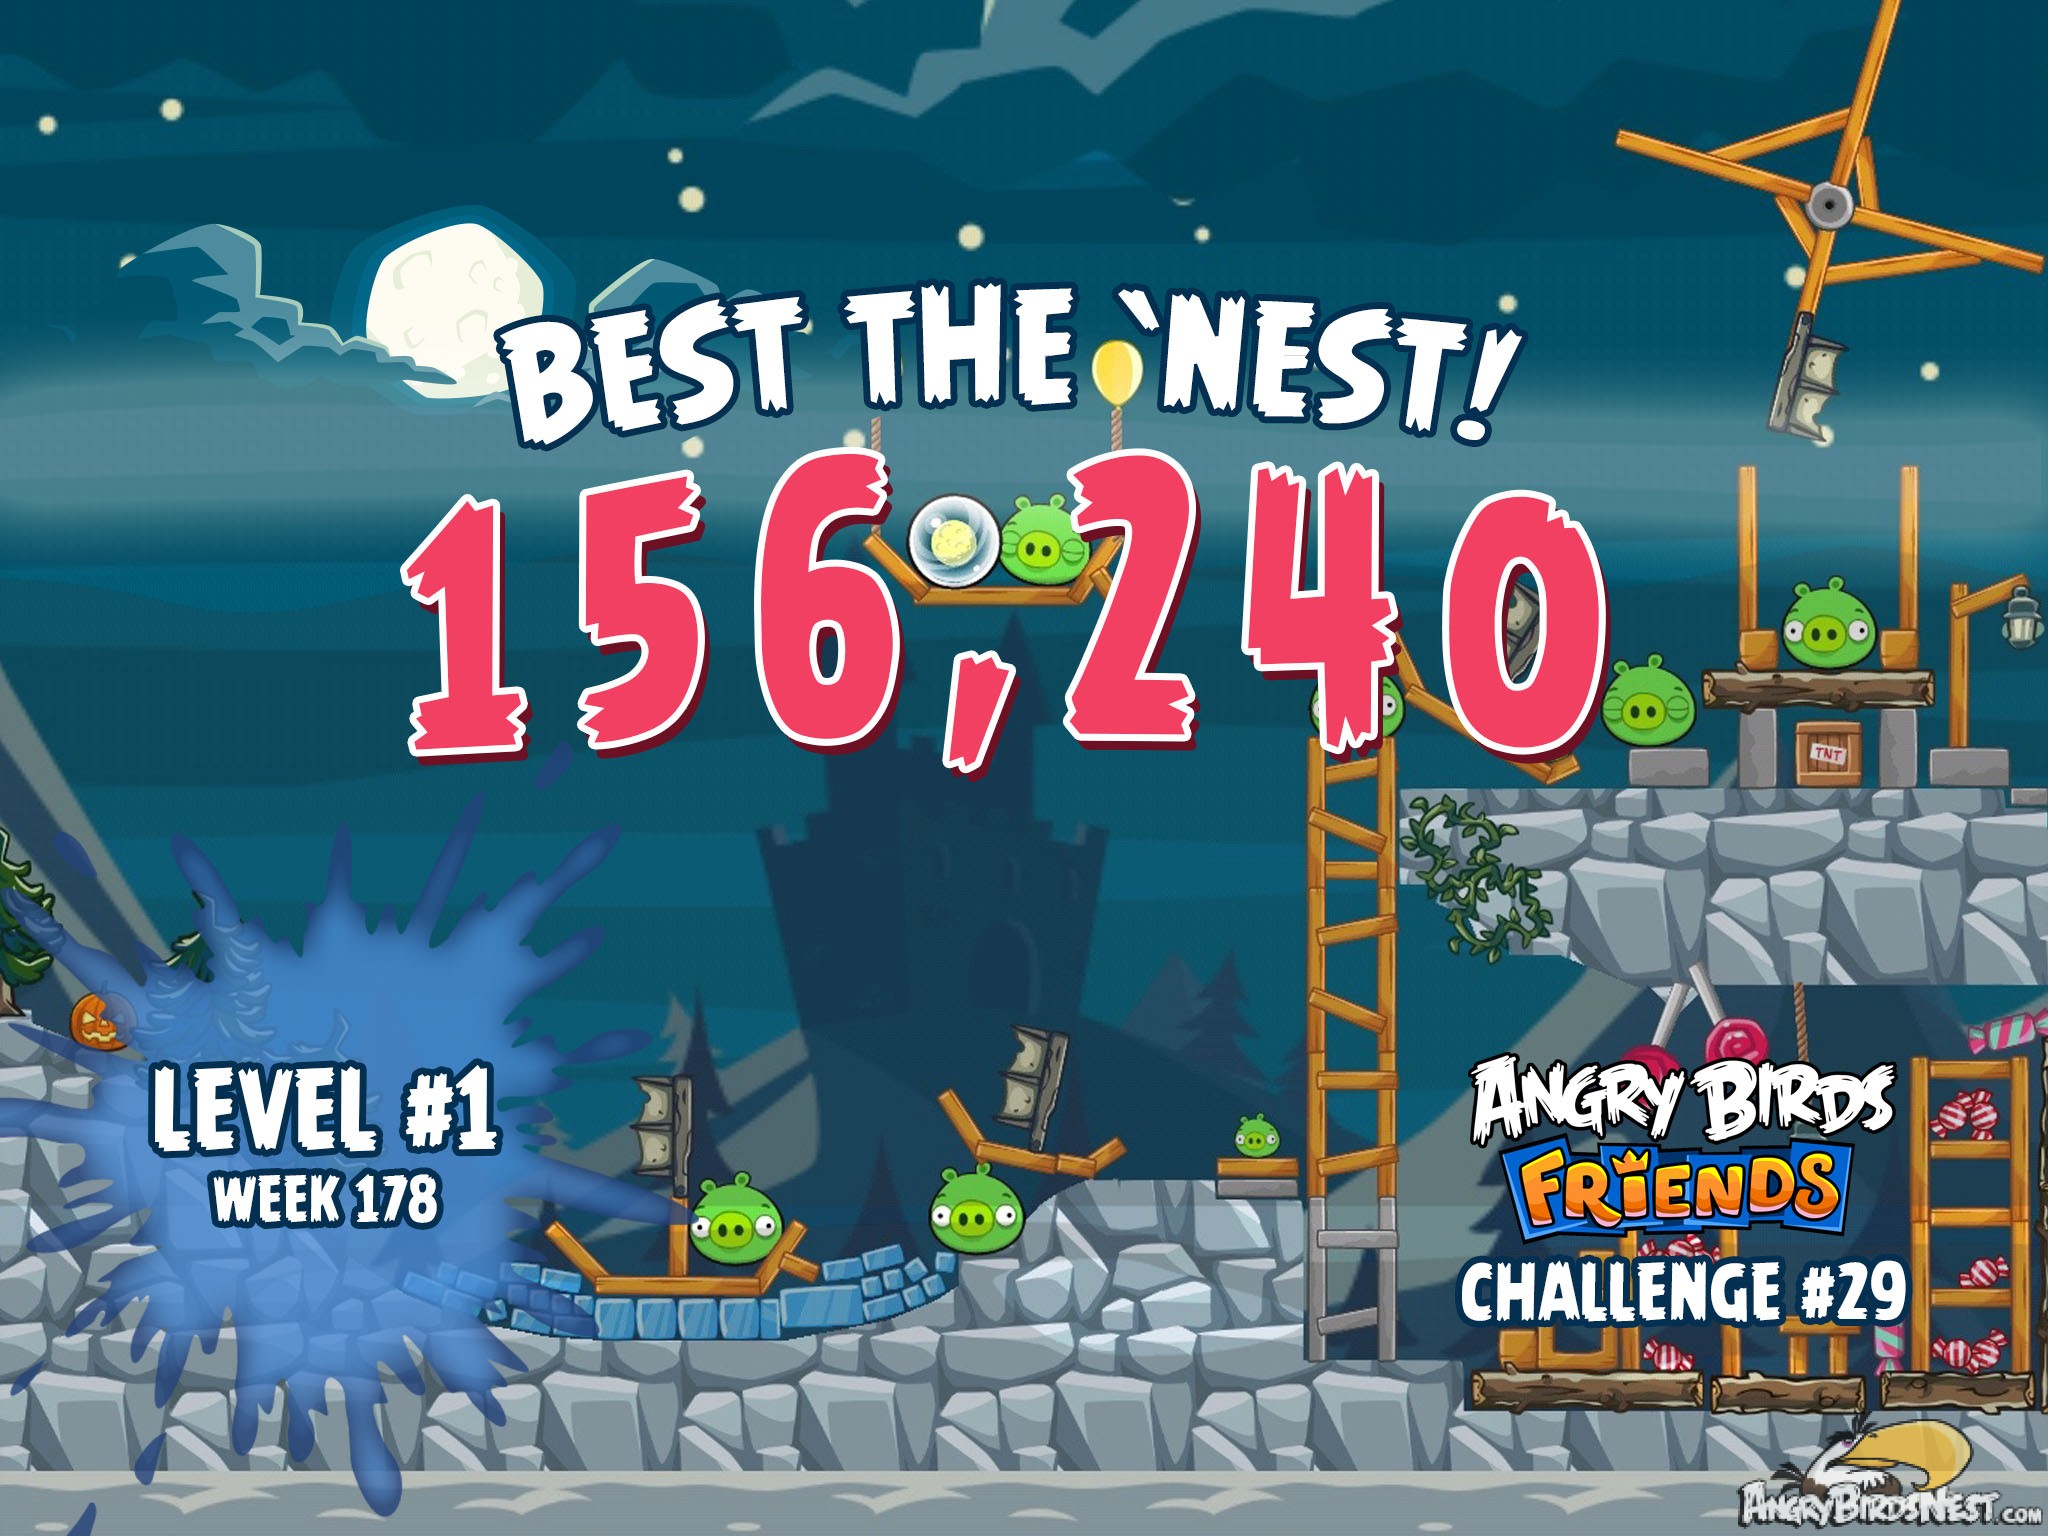 Angry Birds Friends Best the Nest Challenge Week 29